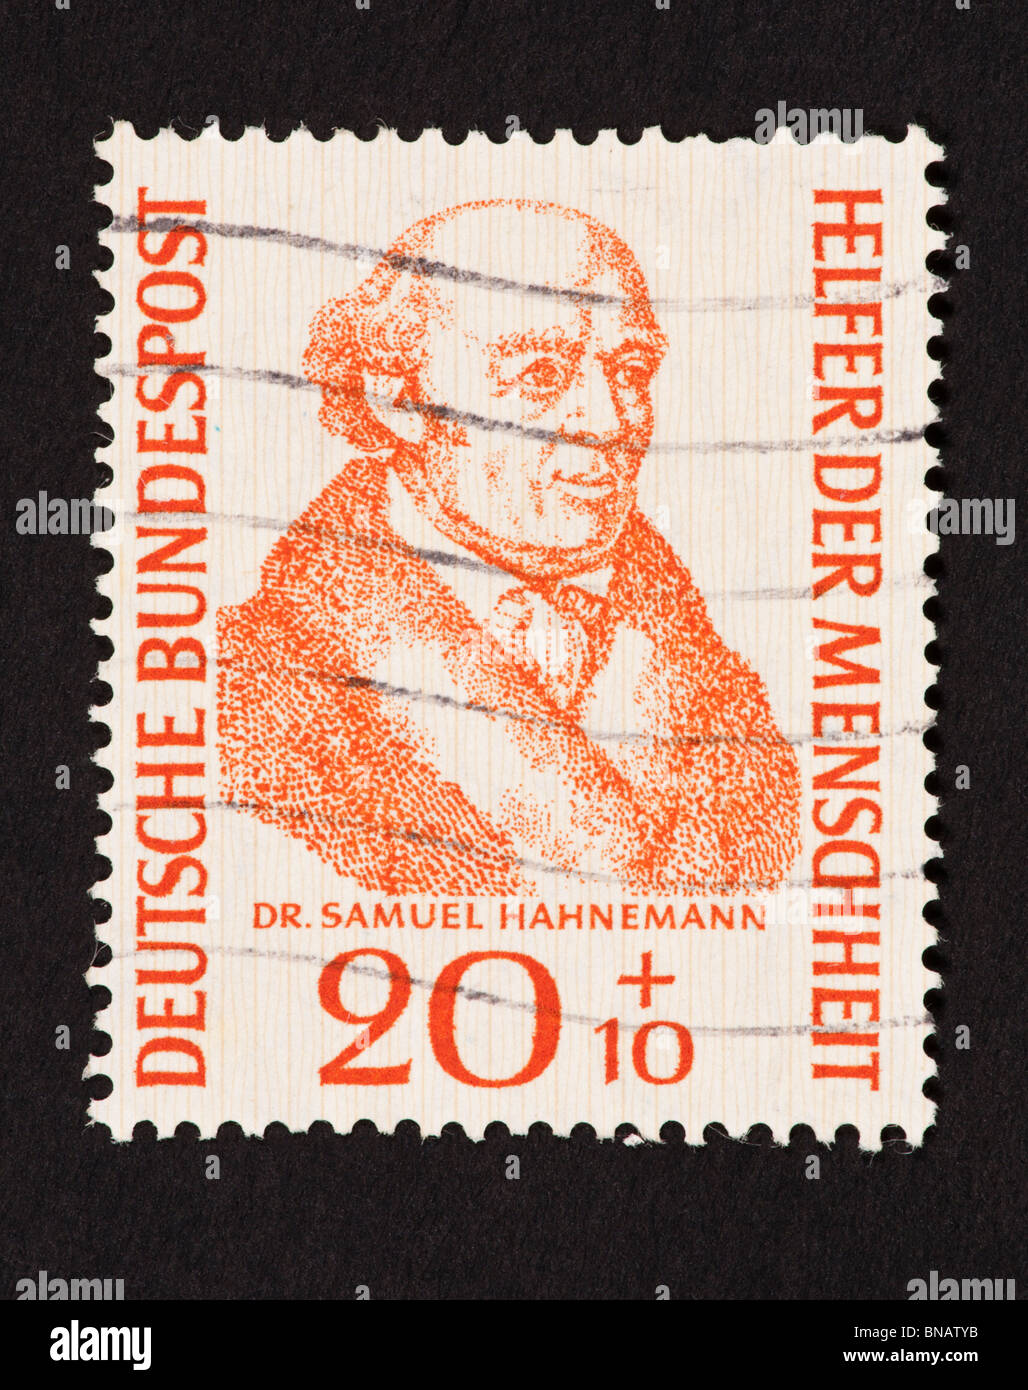 Postage stamp from Germany depicting Dr. Samuel Hahnemann. Stock Photo